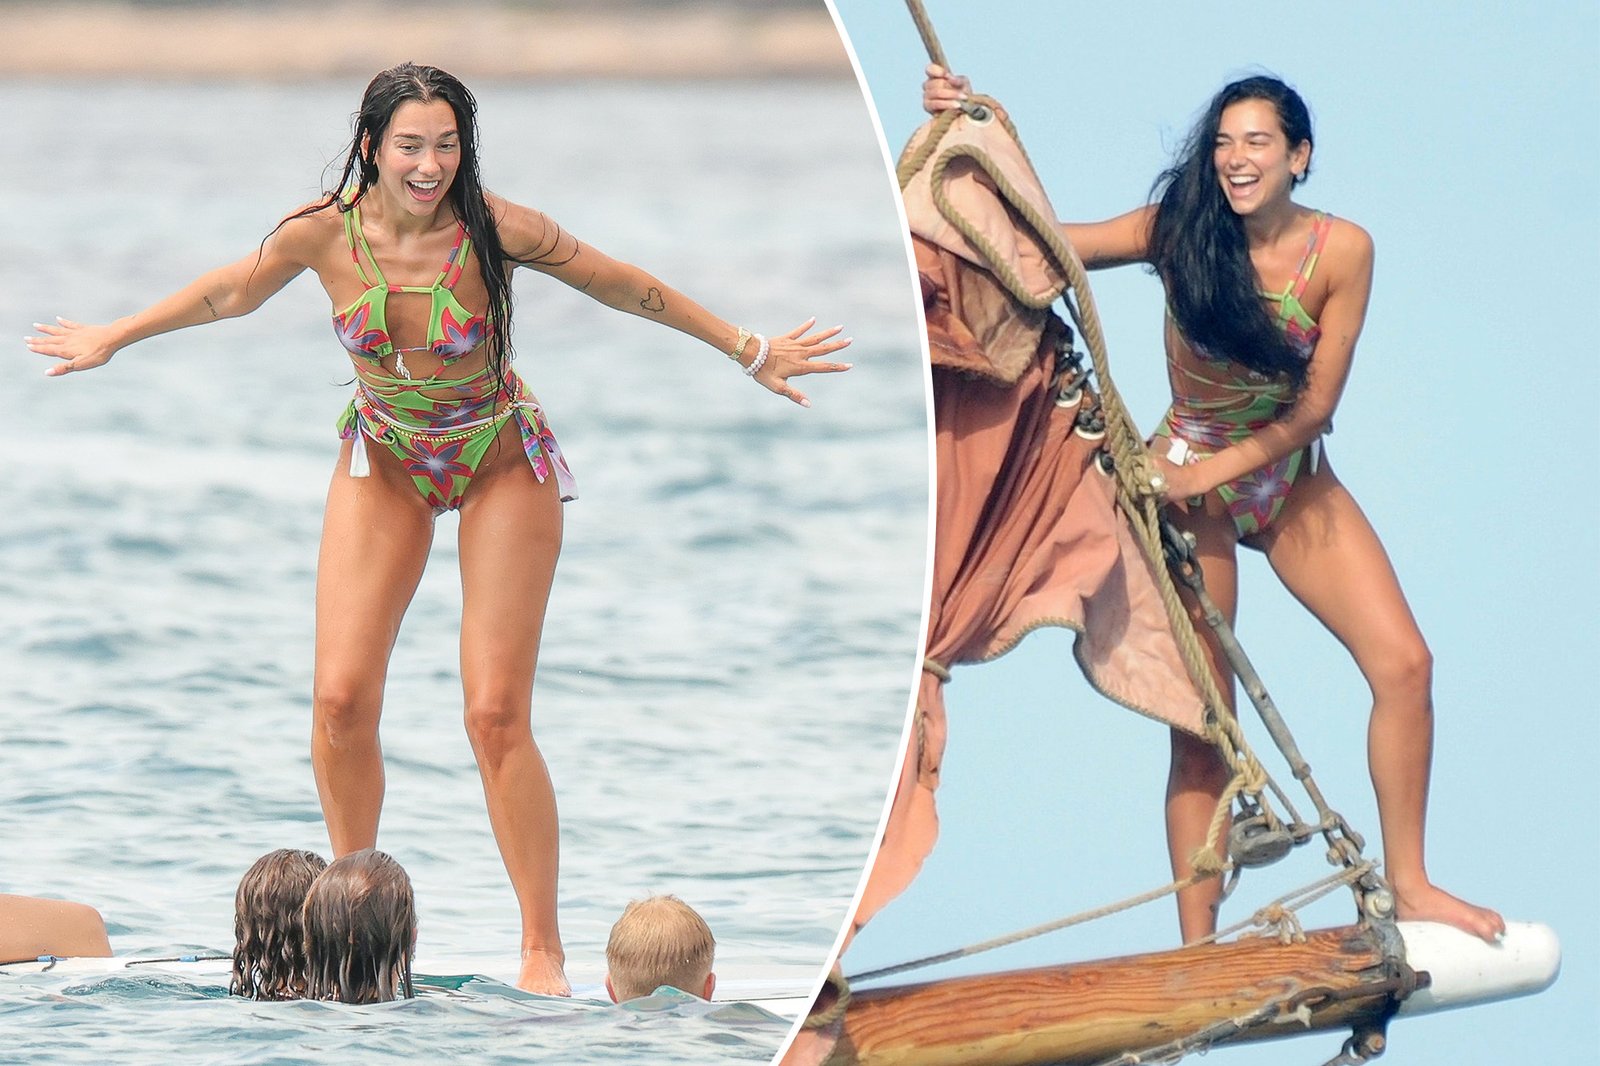 Dua Lipa leaps into the ocean, balances on surfboard while laughing with chums